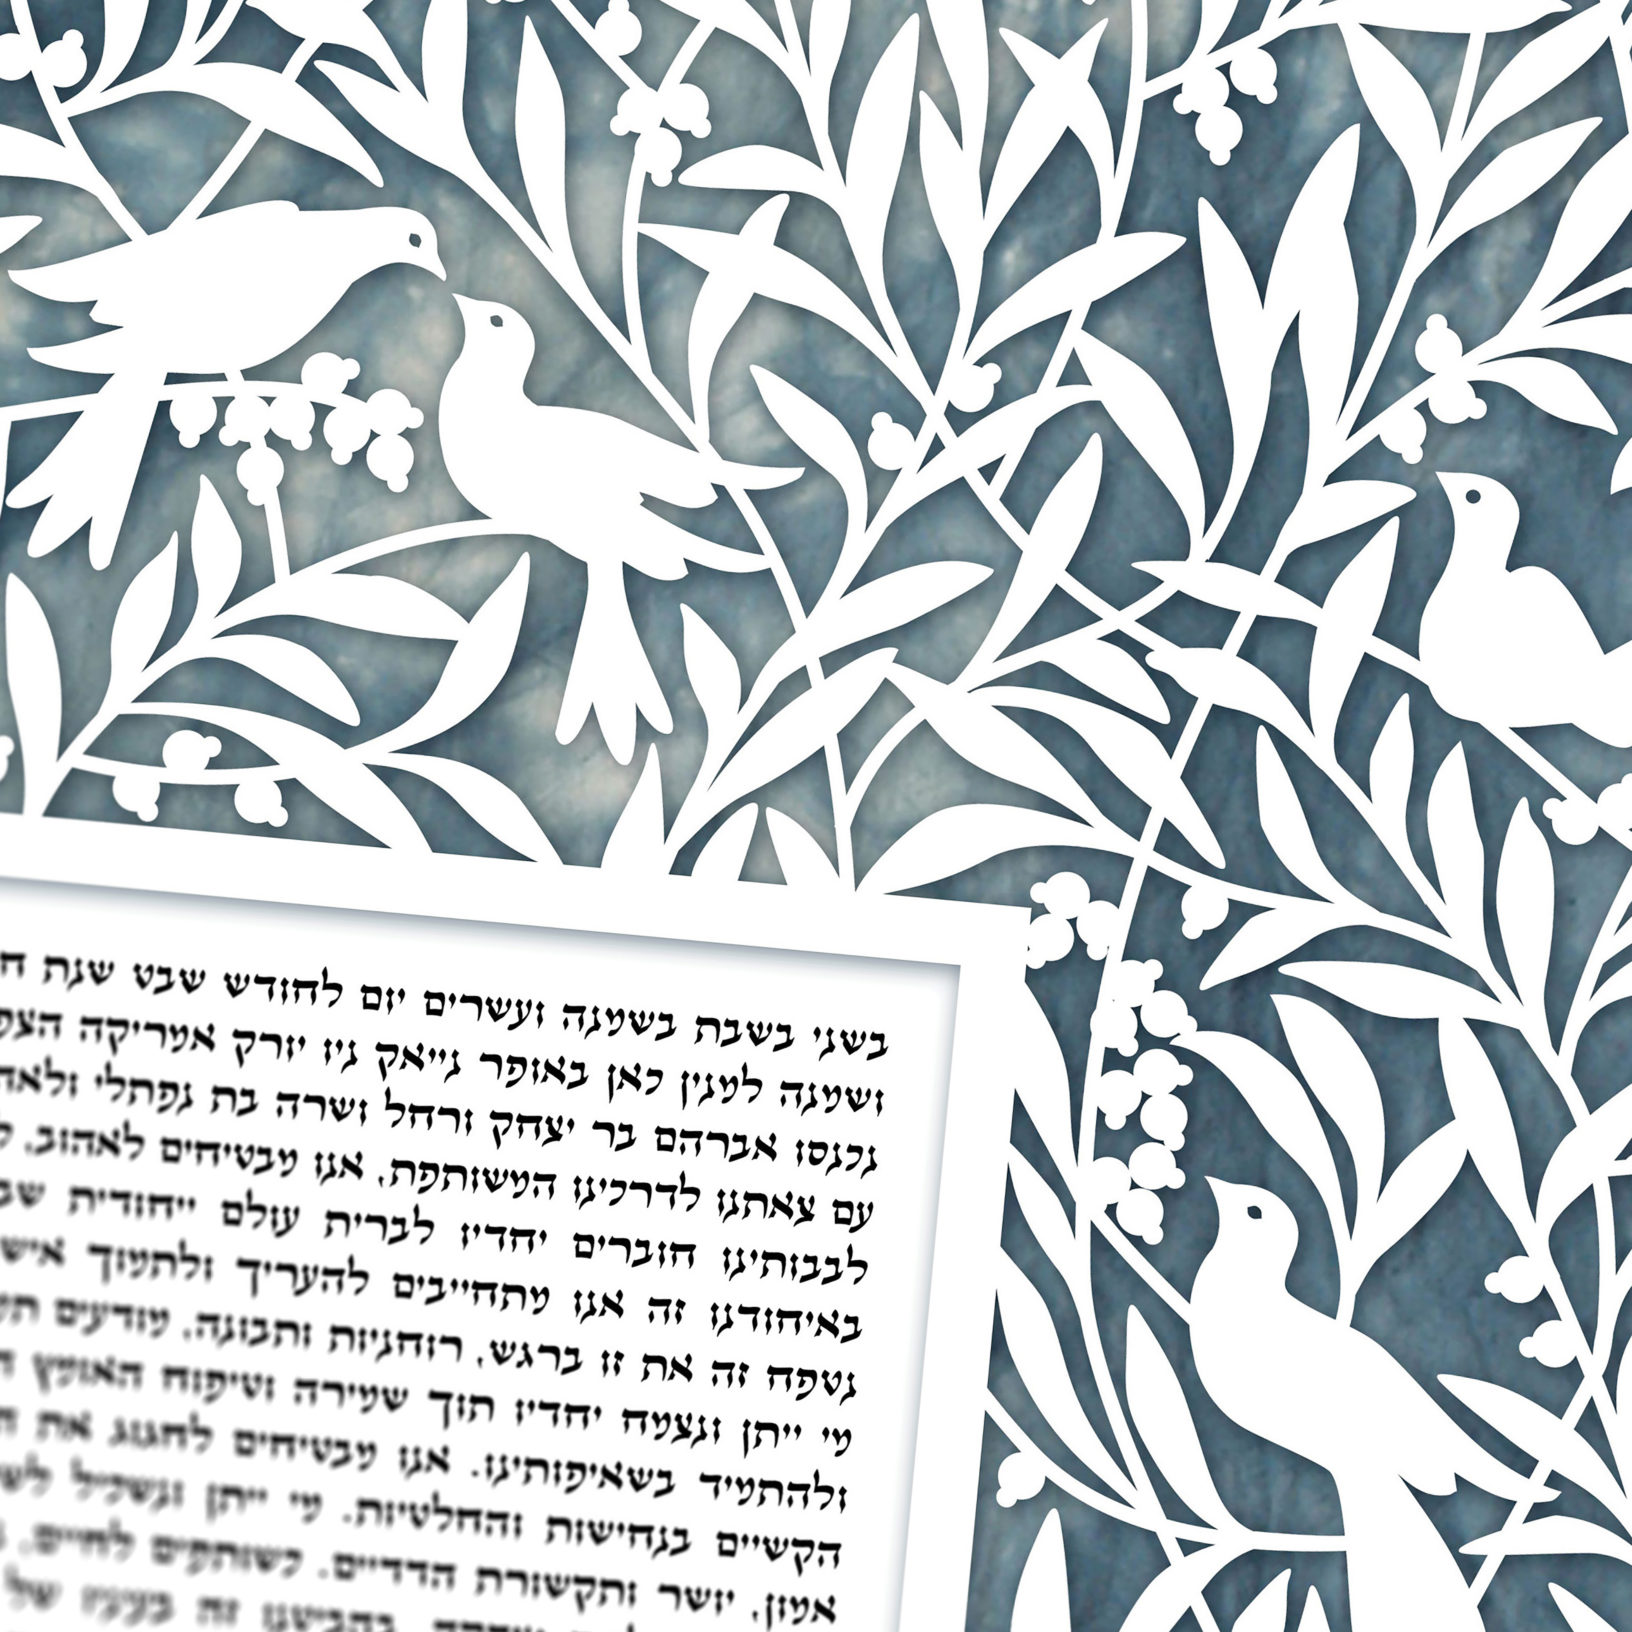 Picking Berries Papercut Ketubah Jewish Marriage Contracts by Enya Keshet